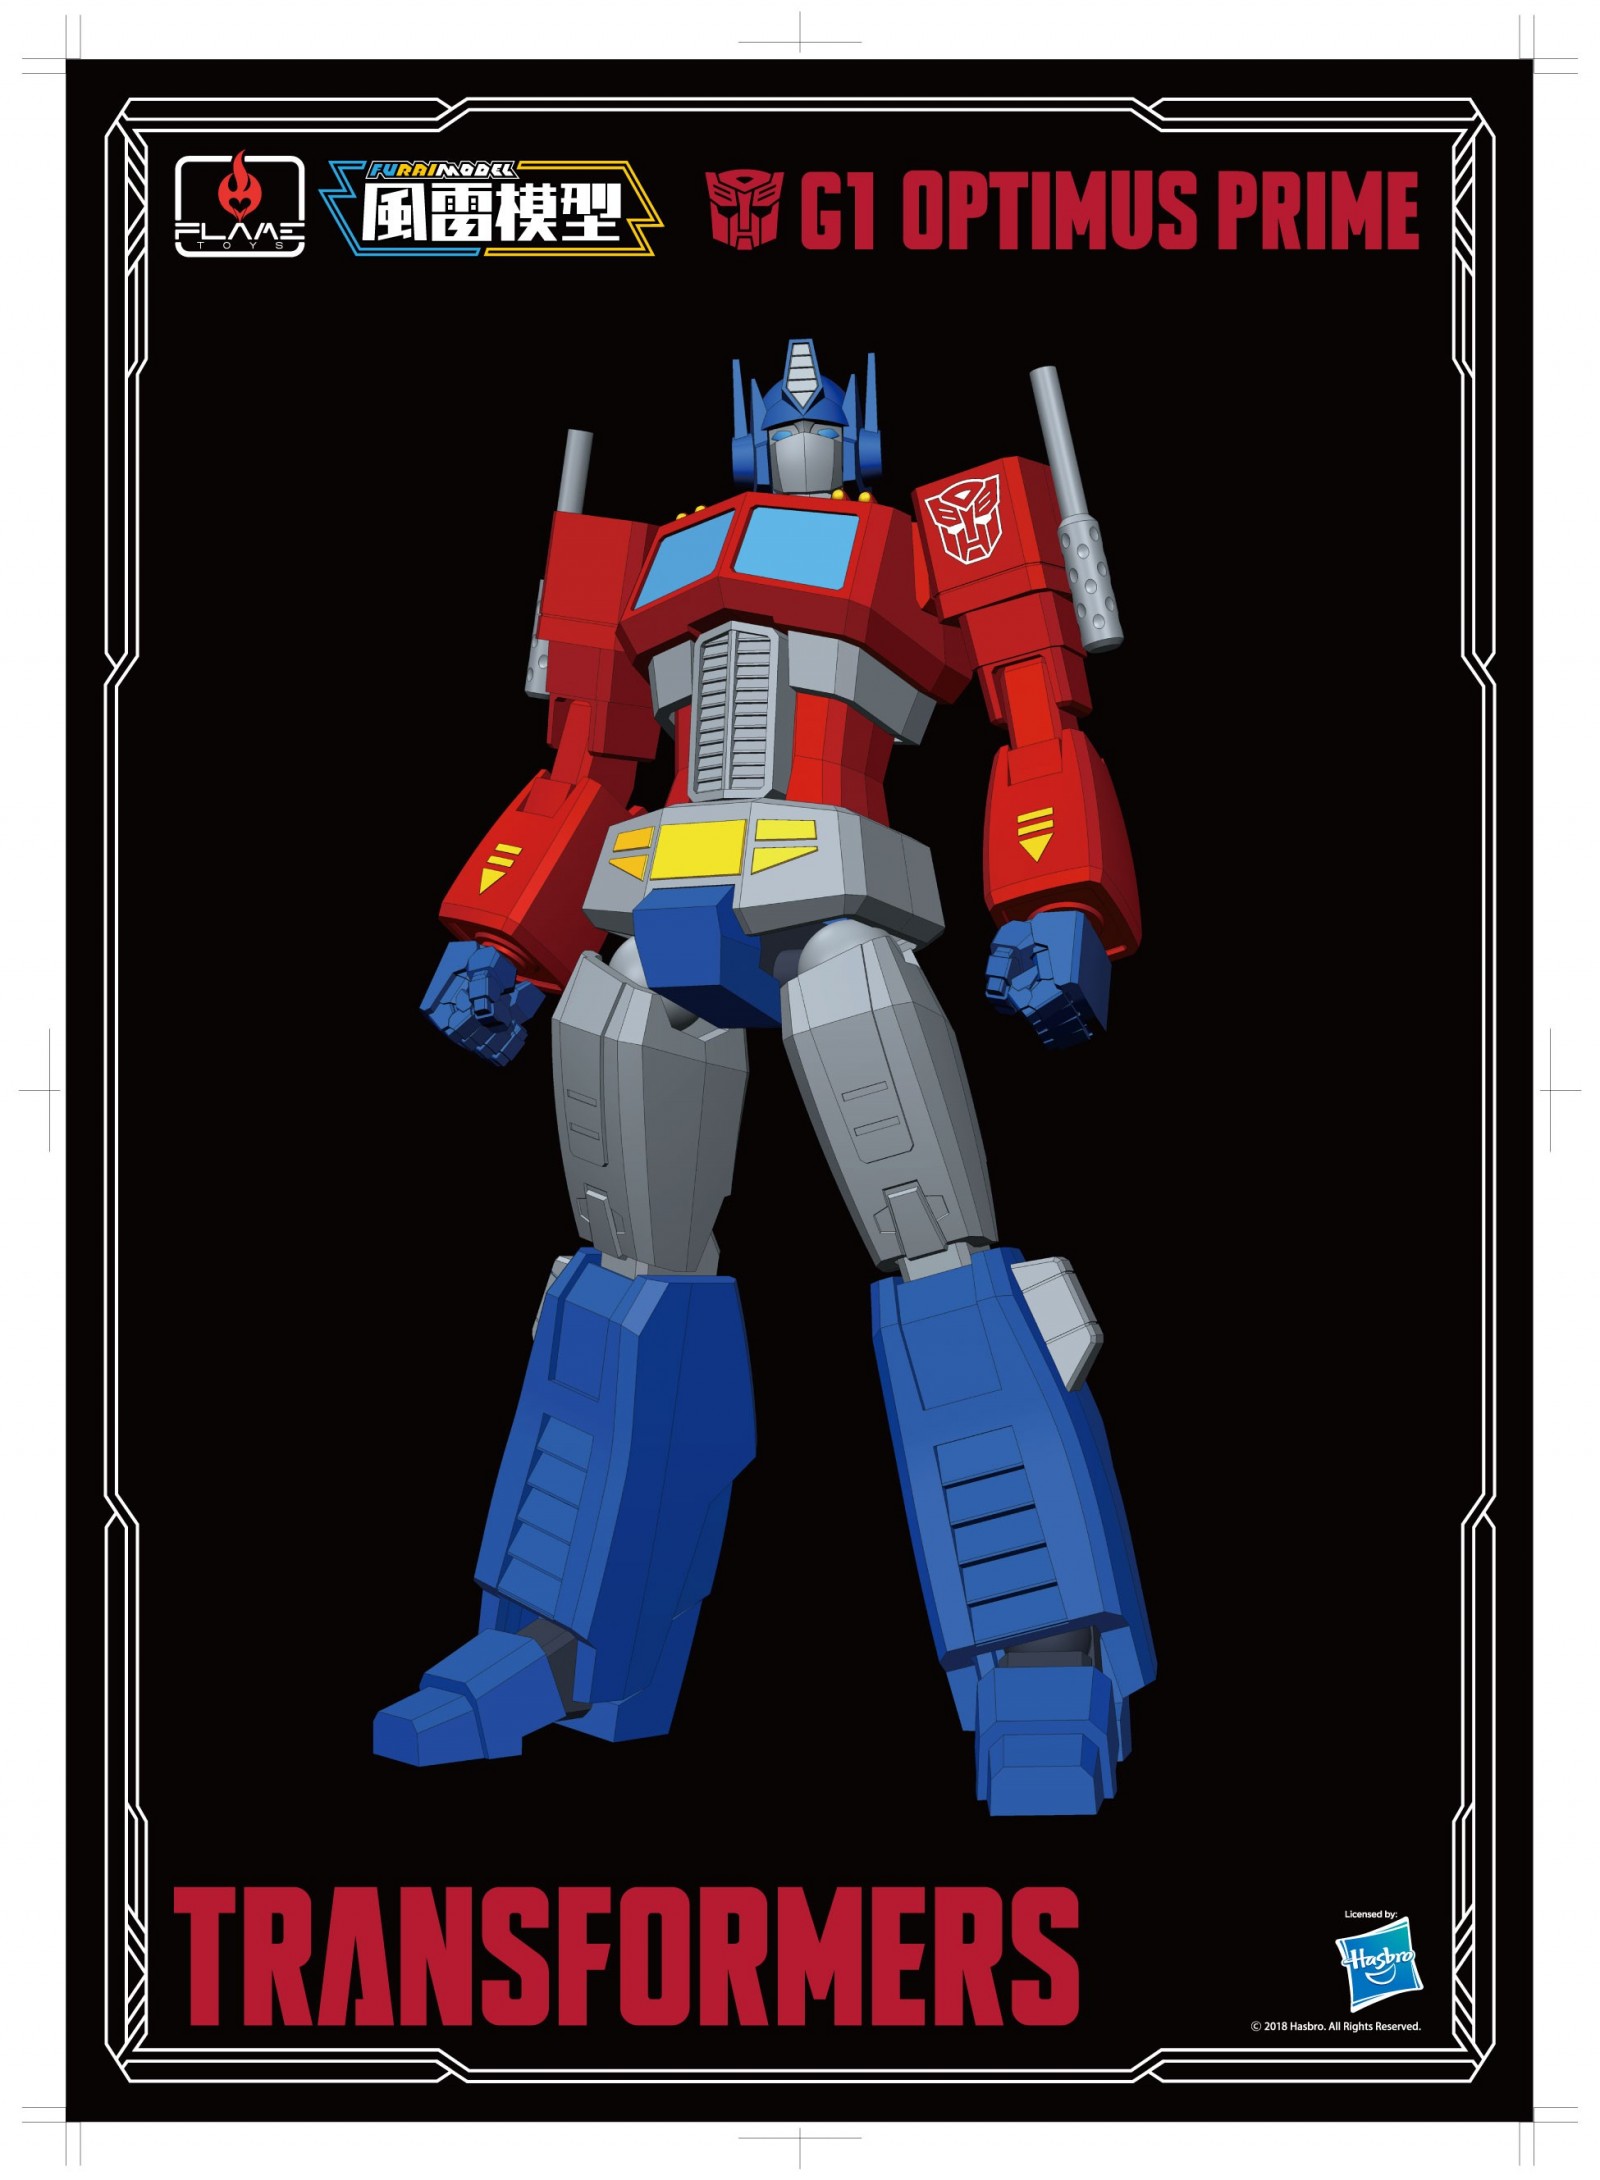 Transformers News: Flame Toys Model Kit and Action Figure Reveals - Stealth Bomber Megatron, Windblade, Rodimus, G1